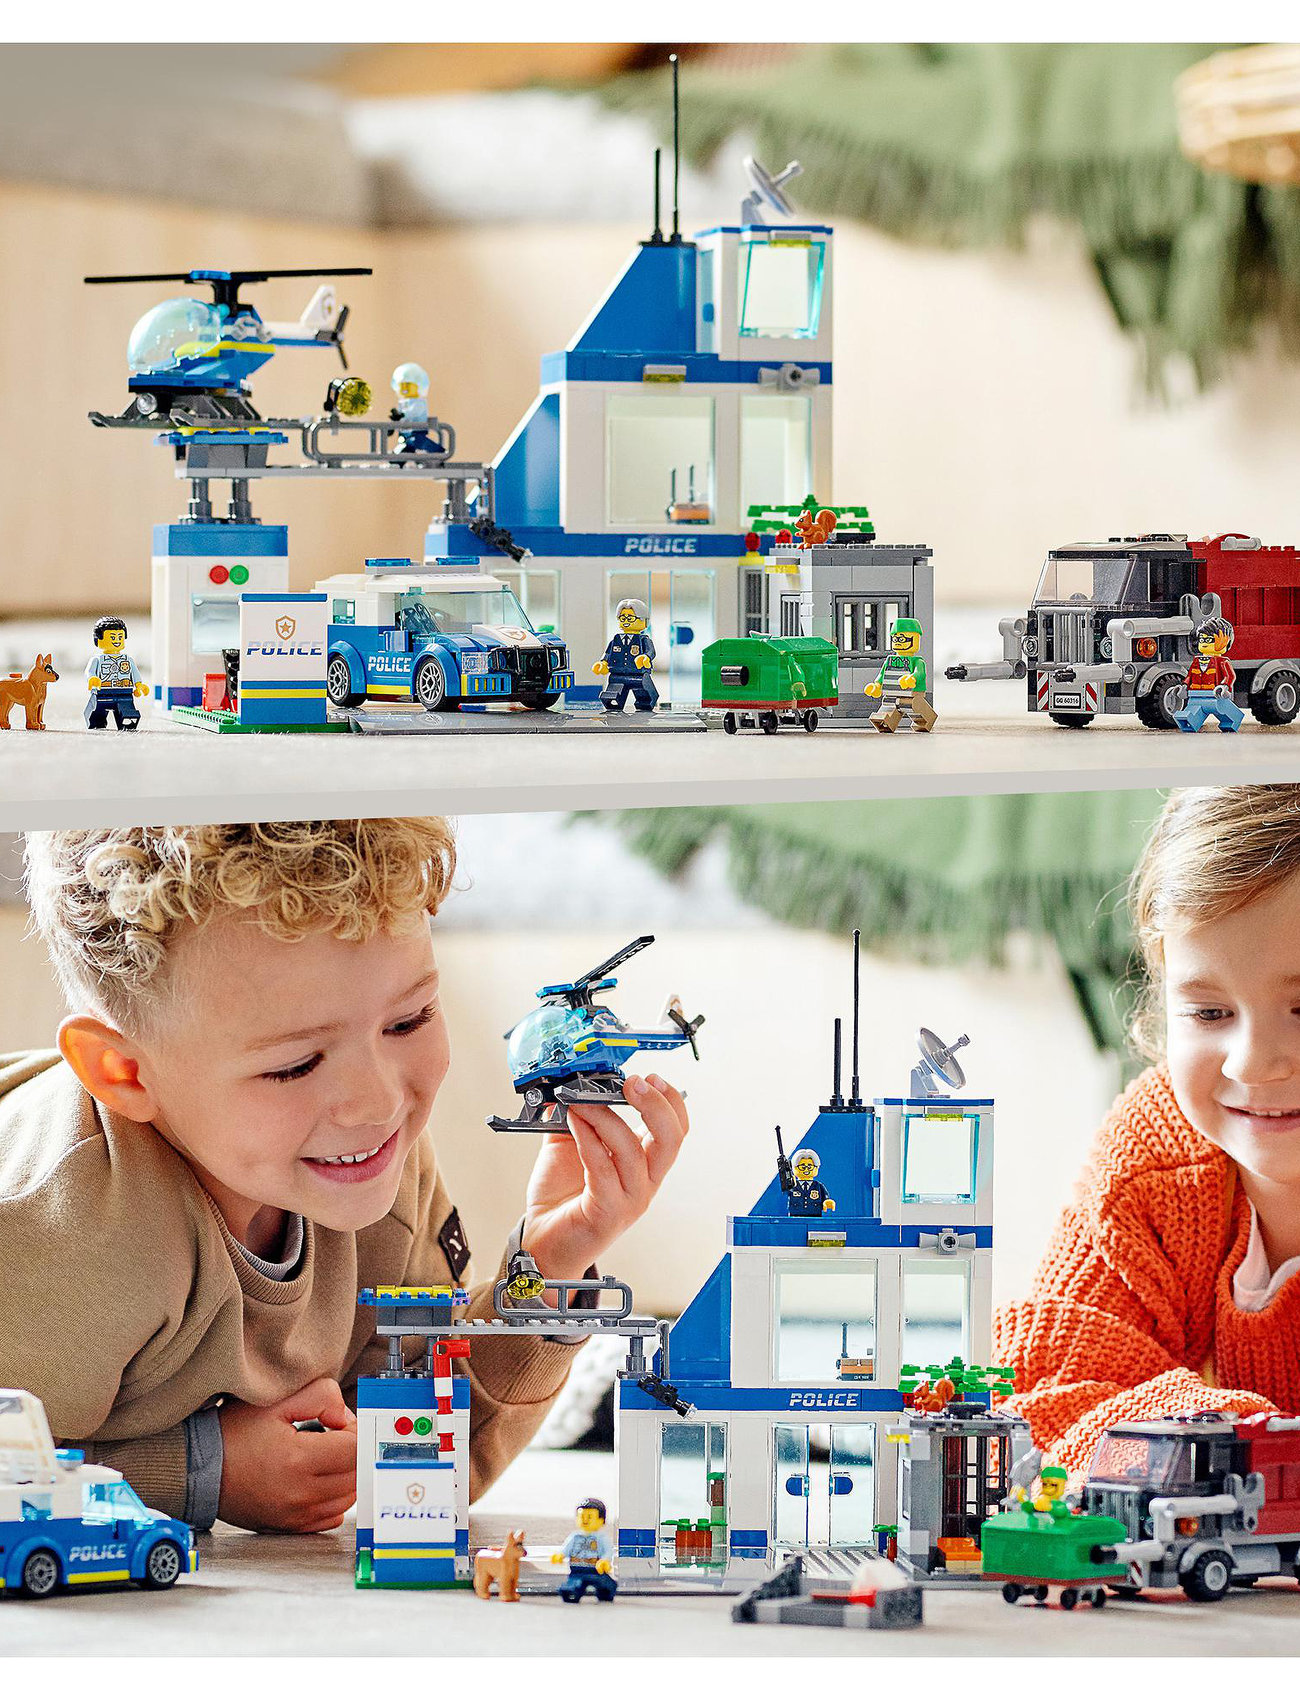 LEGO Police Station Truck Toy & Helicopter Set - -